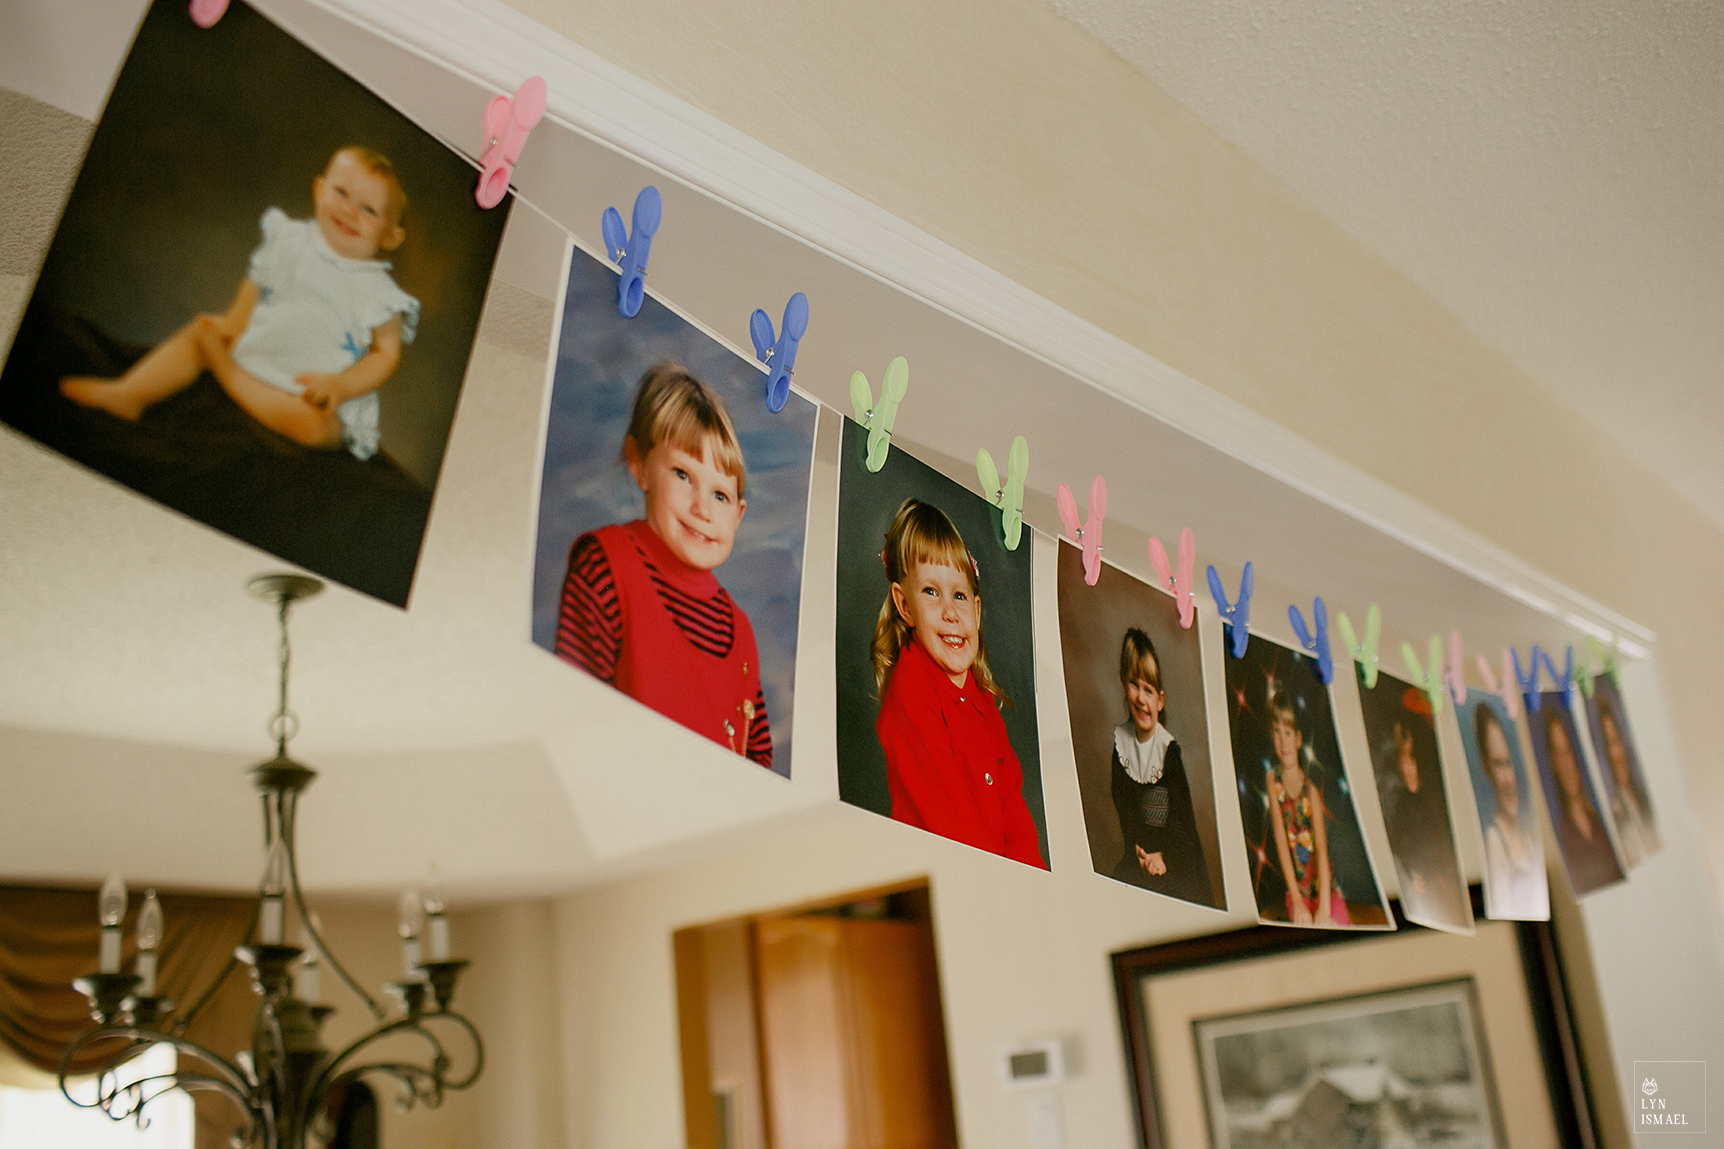 Photos of the bride growing up displayed in her parents' house.